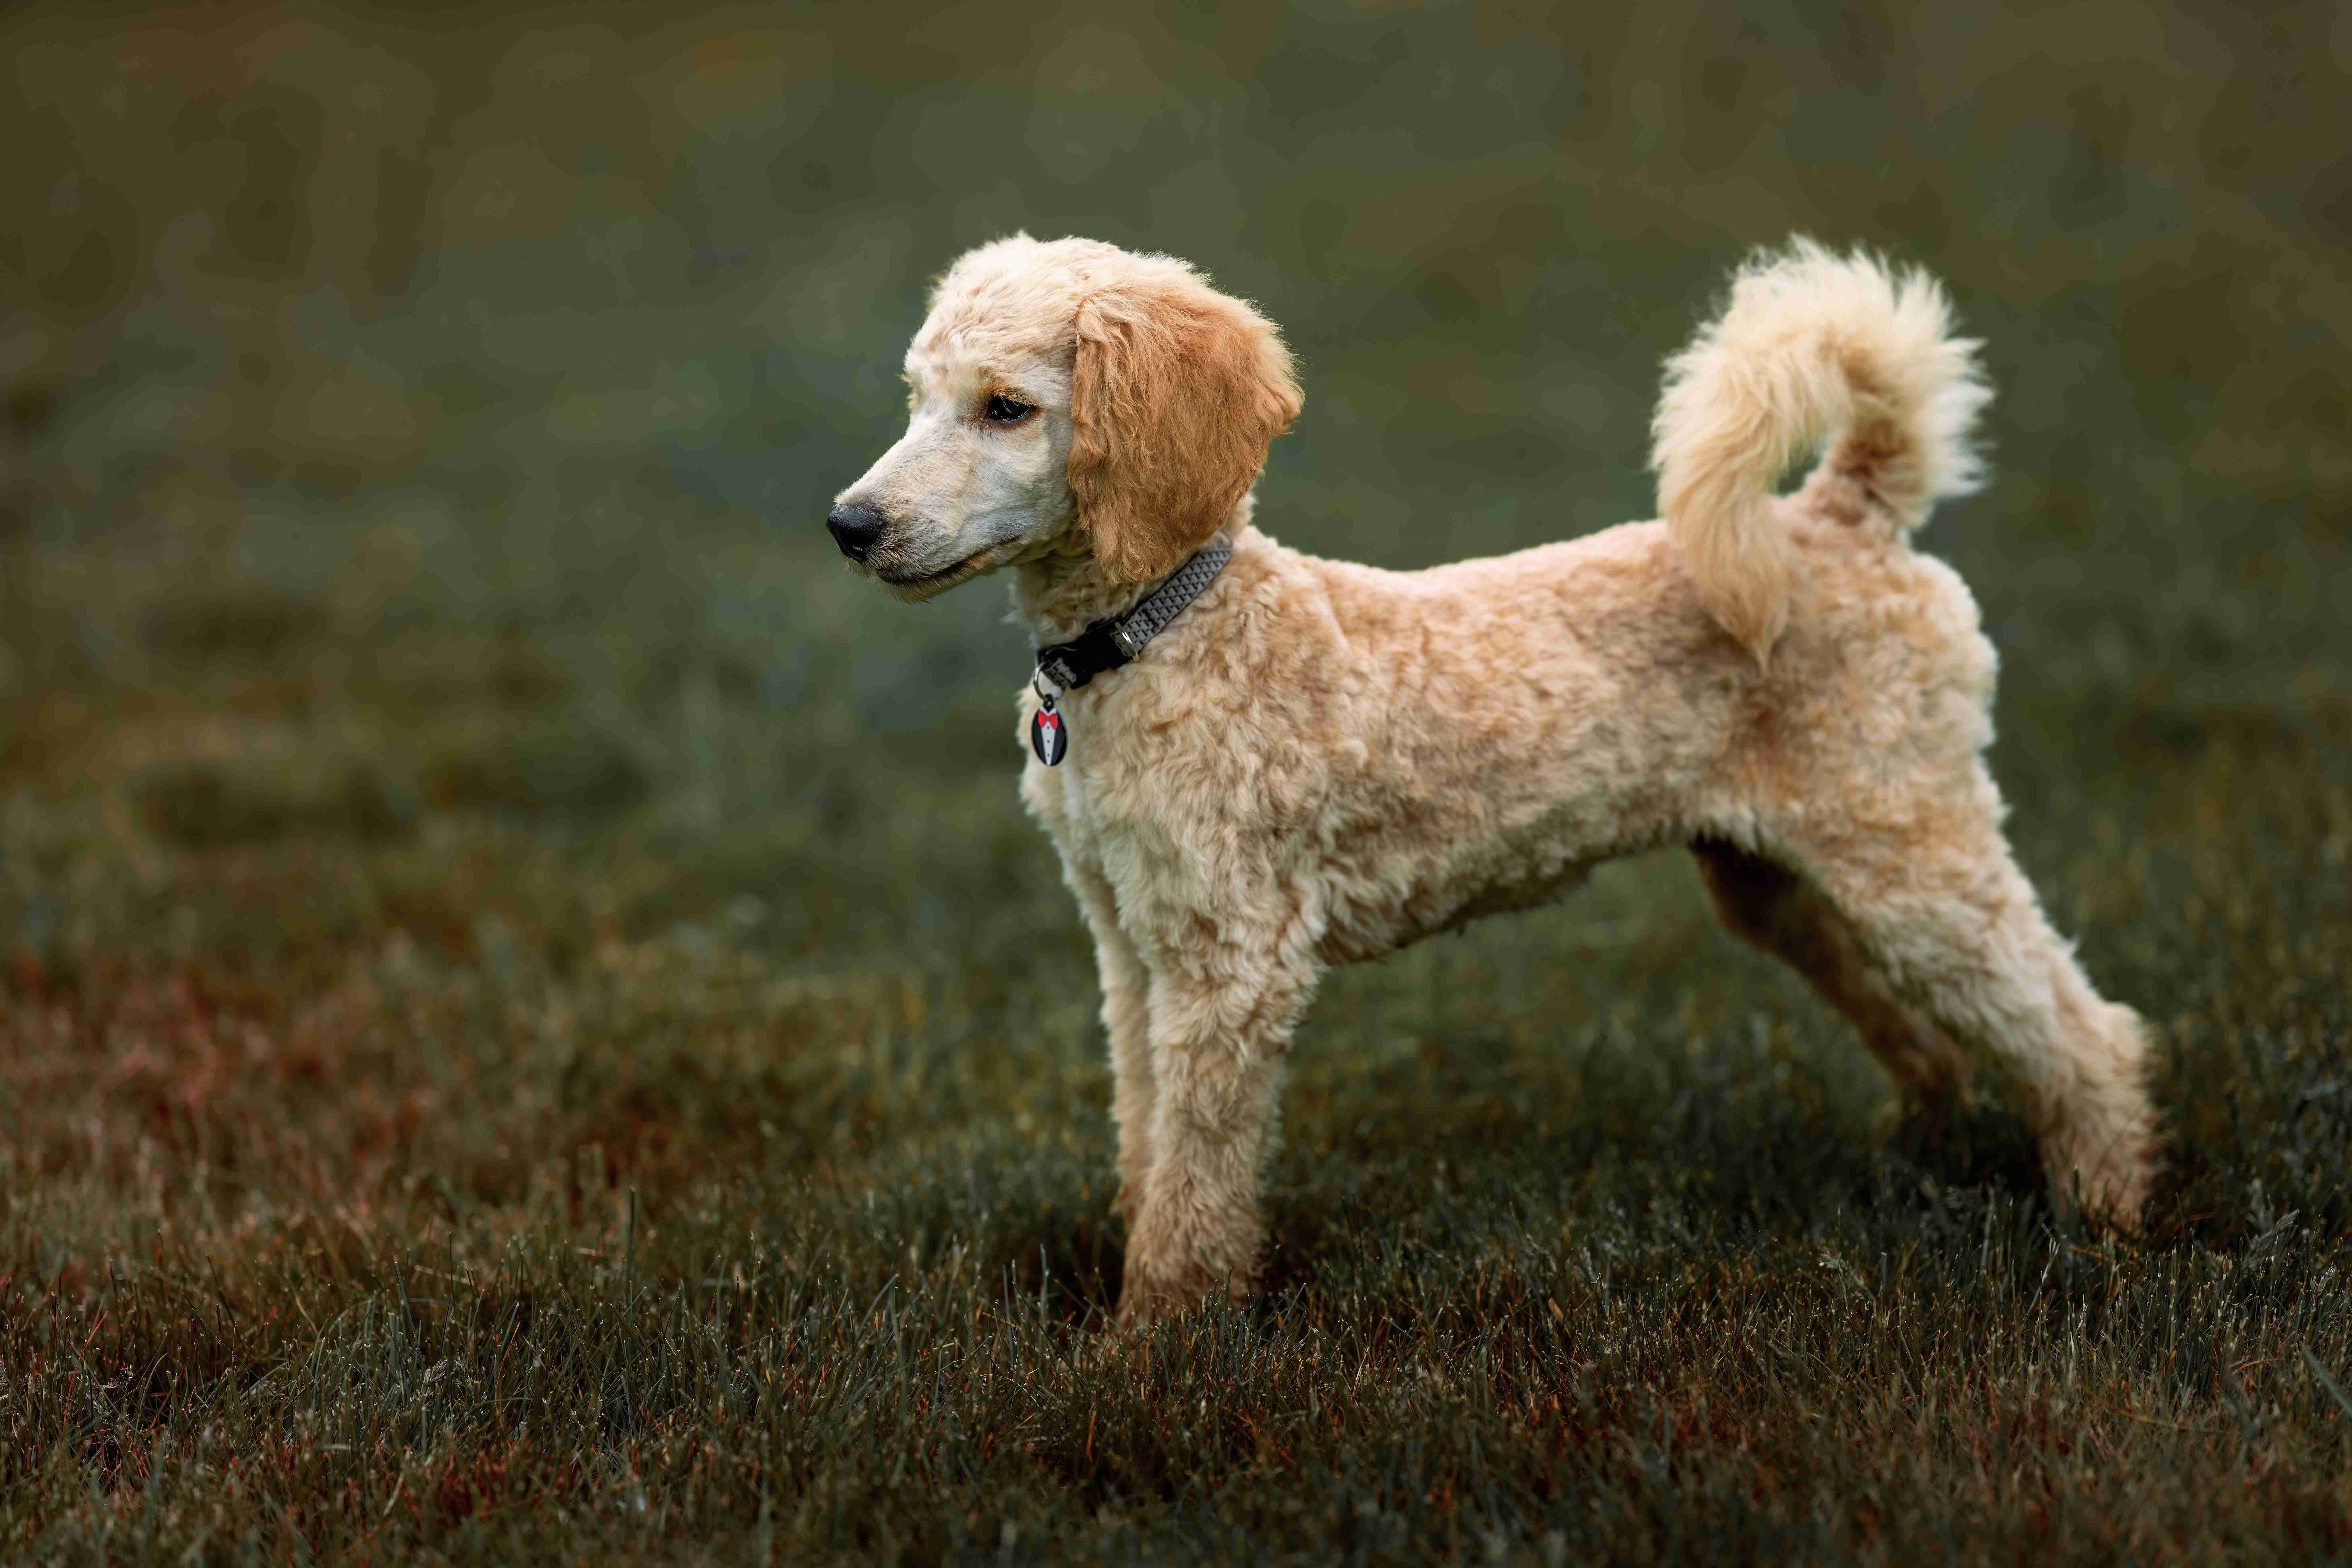 Did you have any concerns about introducing your Poodle puppy to strangers or visitors?